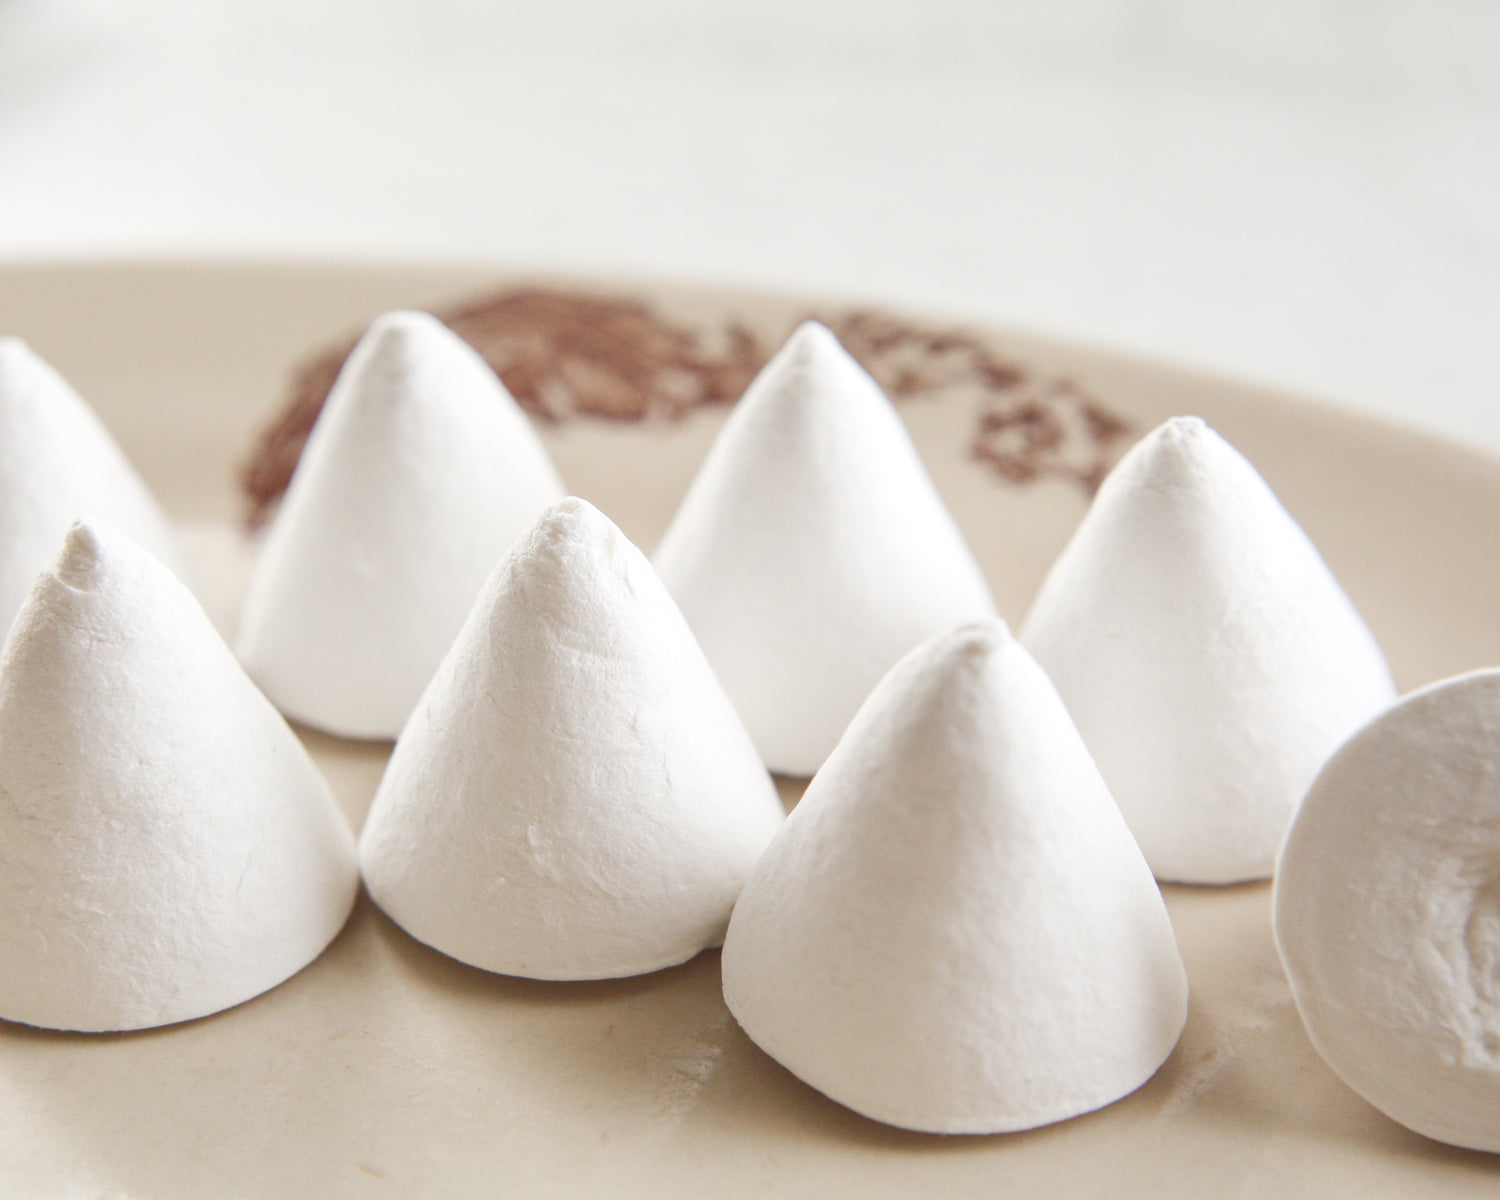 Spun Cotton Cones, 40mm Rounded Cone Craft Shapes, 8 Pcs.